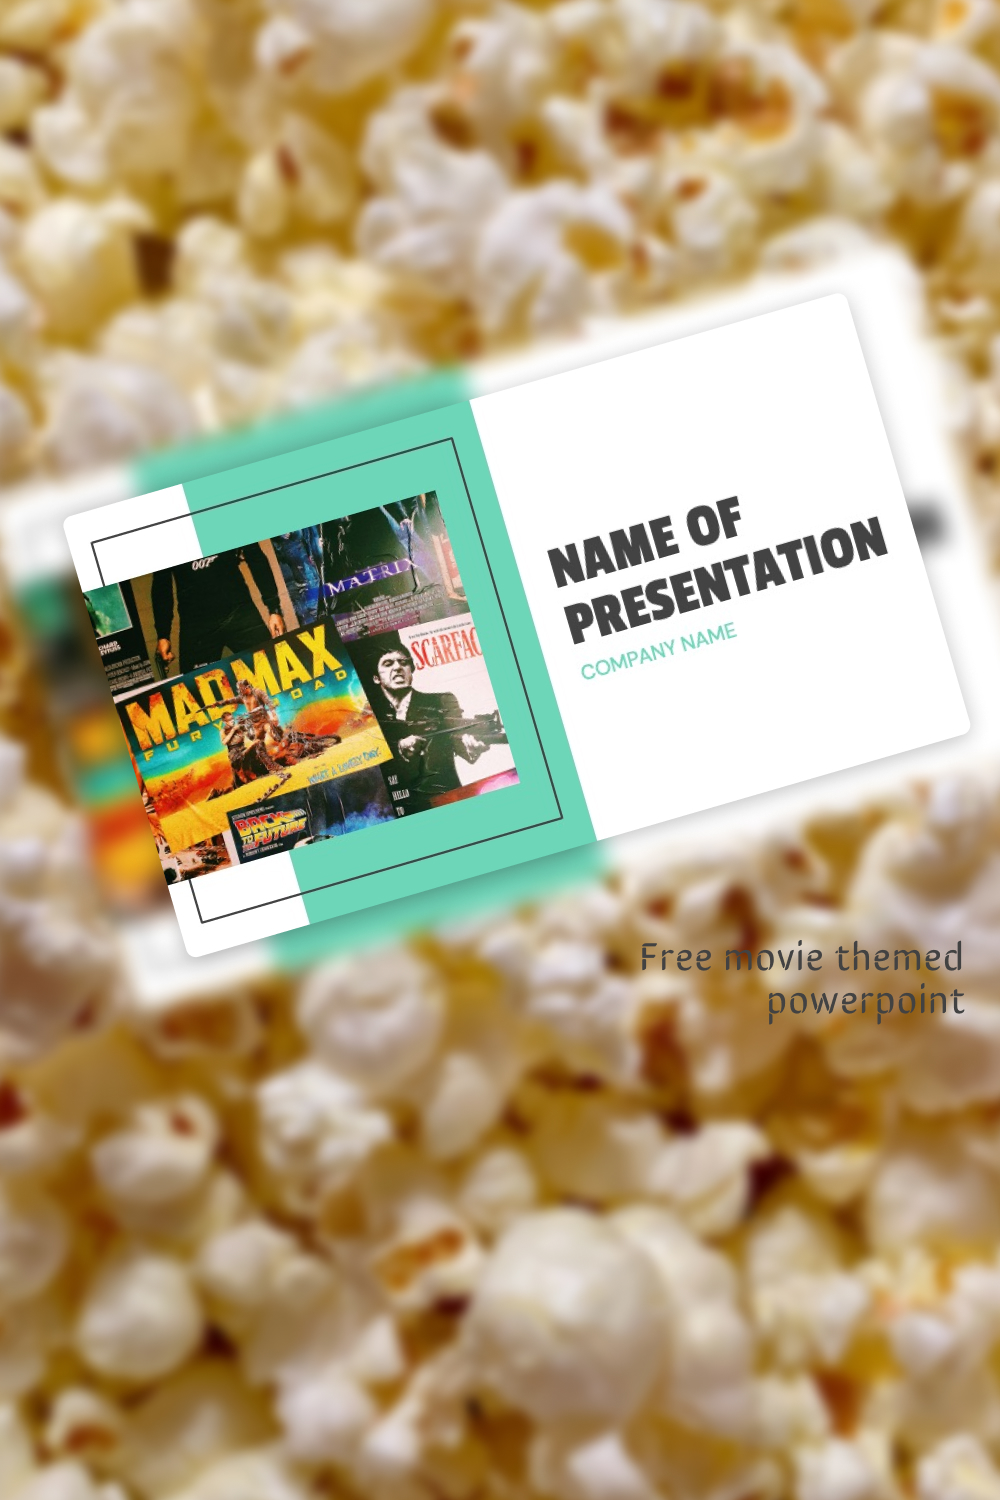 Free movie themed powerpoint.